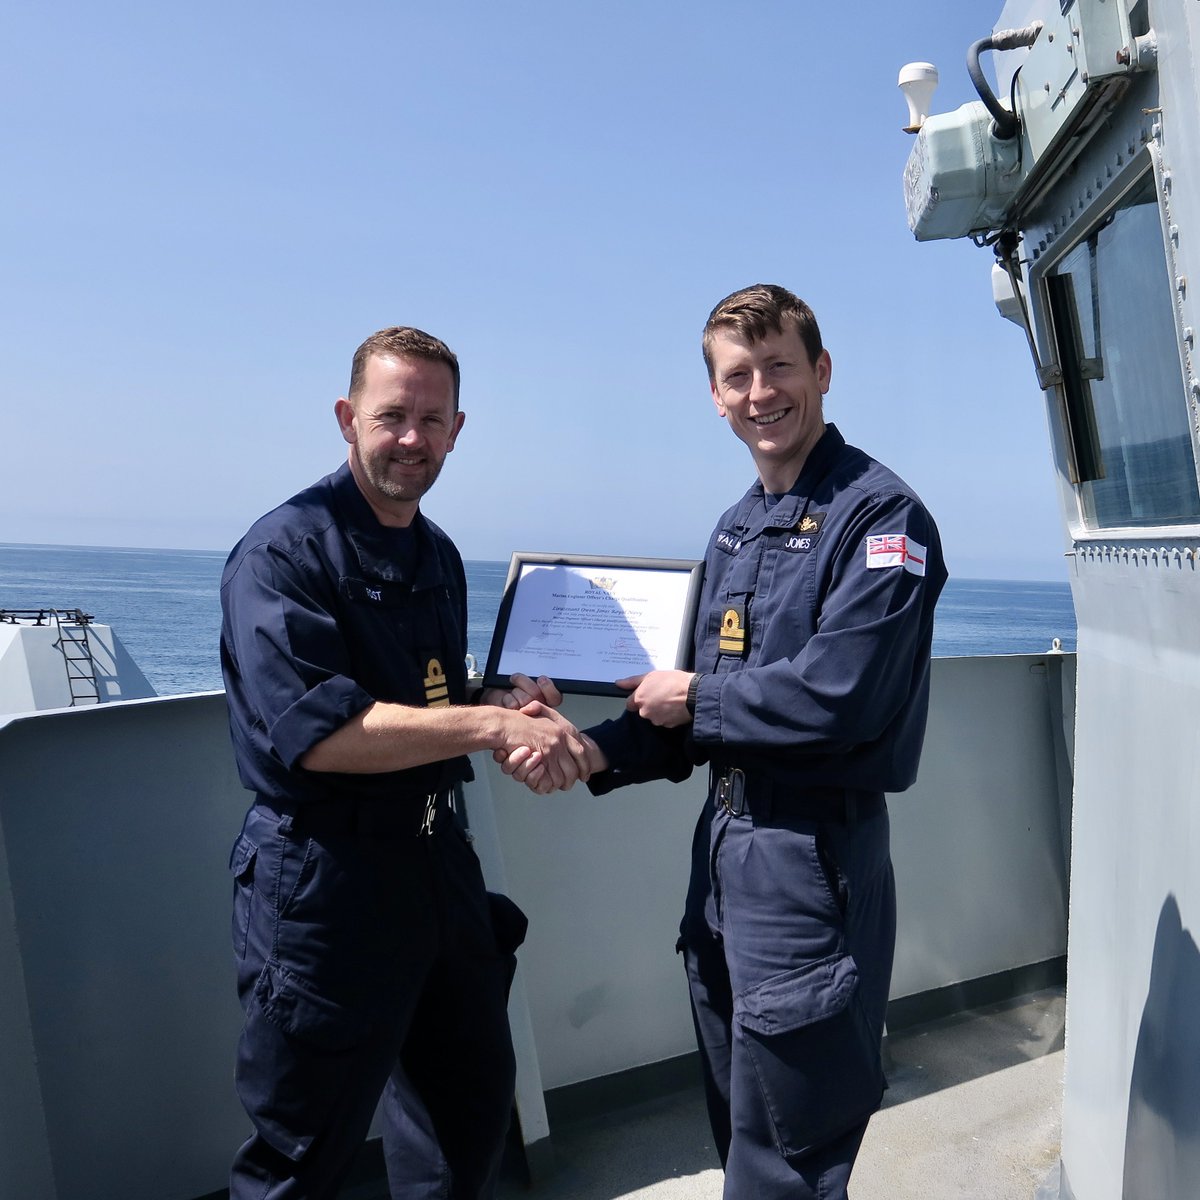 Congratulations to our Deputy Marine Engineering Officer, Lt Owen Jones, for achieving his Marine Engineering Charge Qualification, marking a major milestone in his career as an Marine Engineer 🛠️ #awesoME #FearNORT